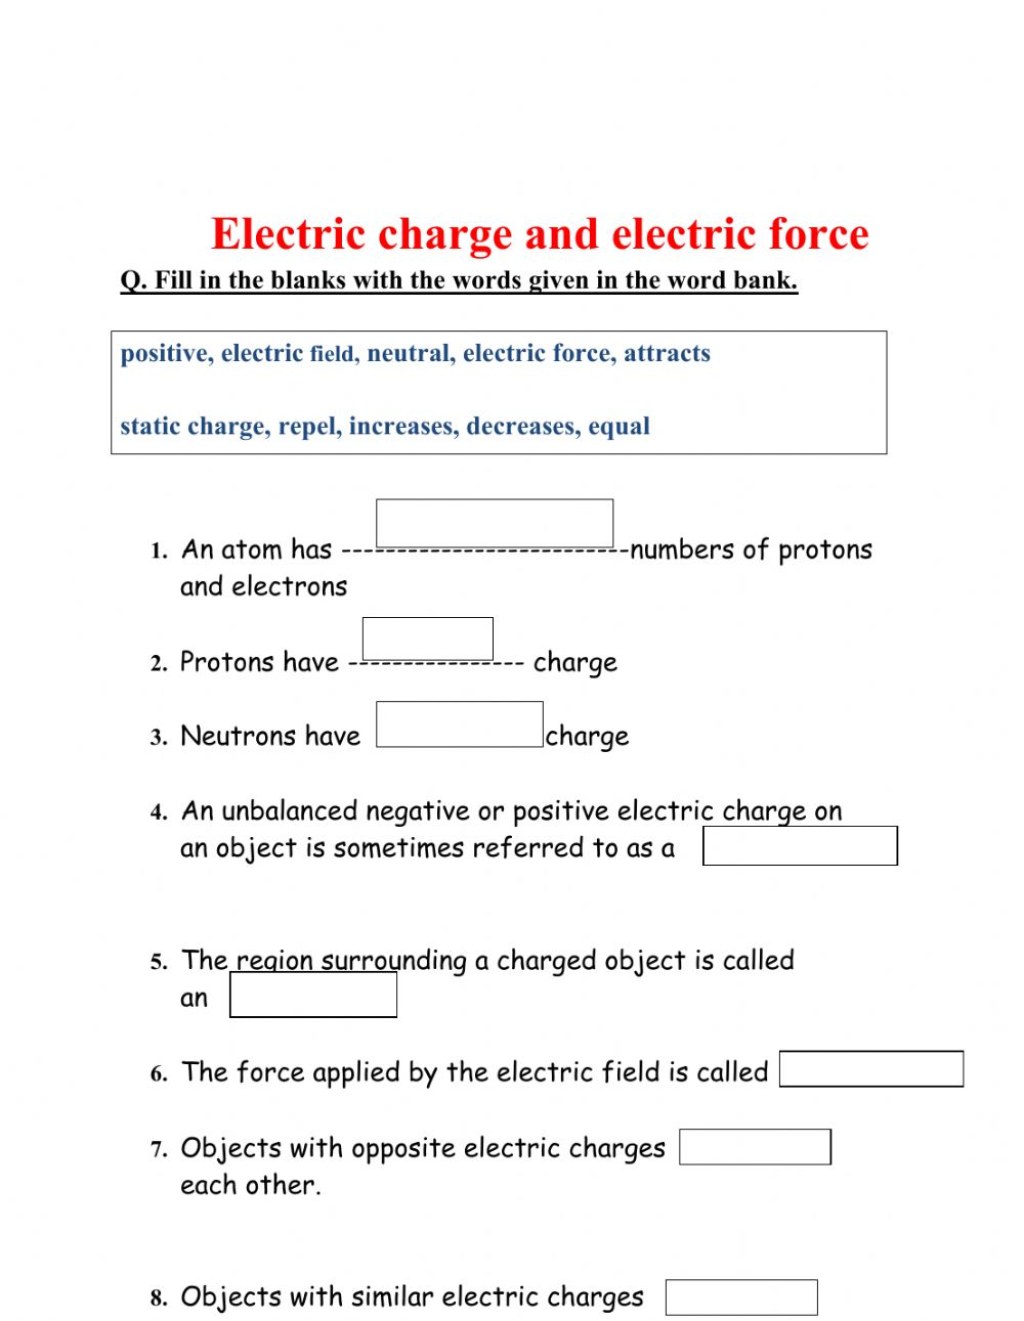 Picture of: Electric charge worksheet